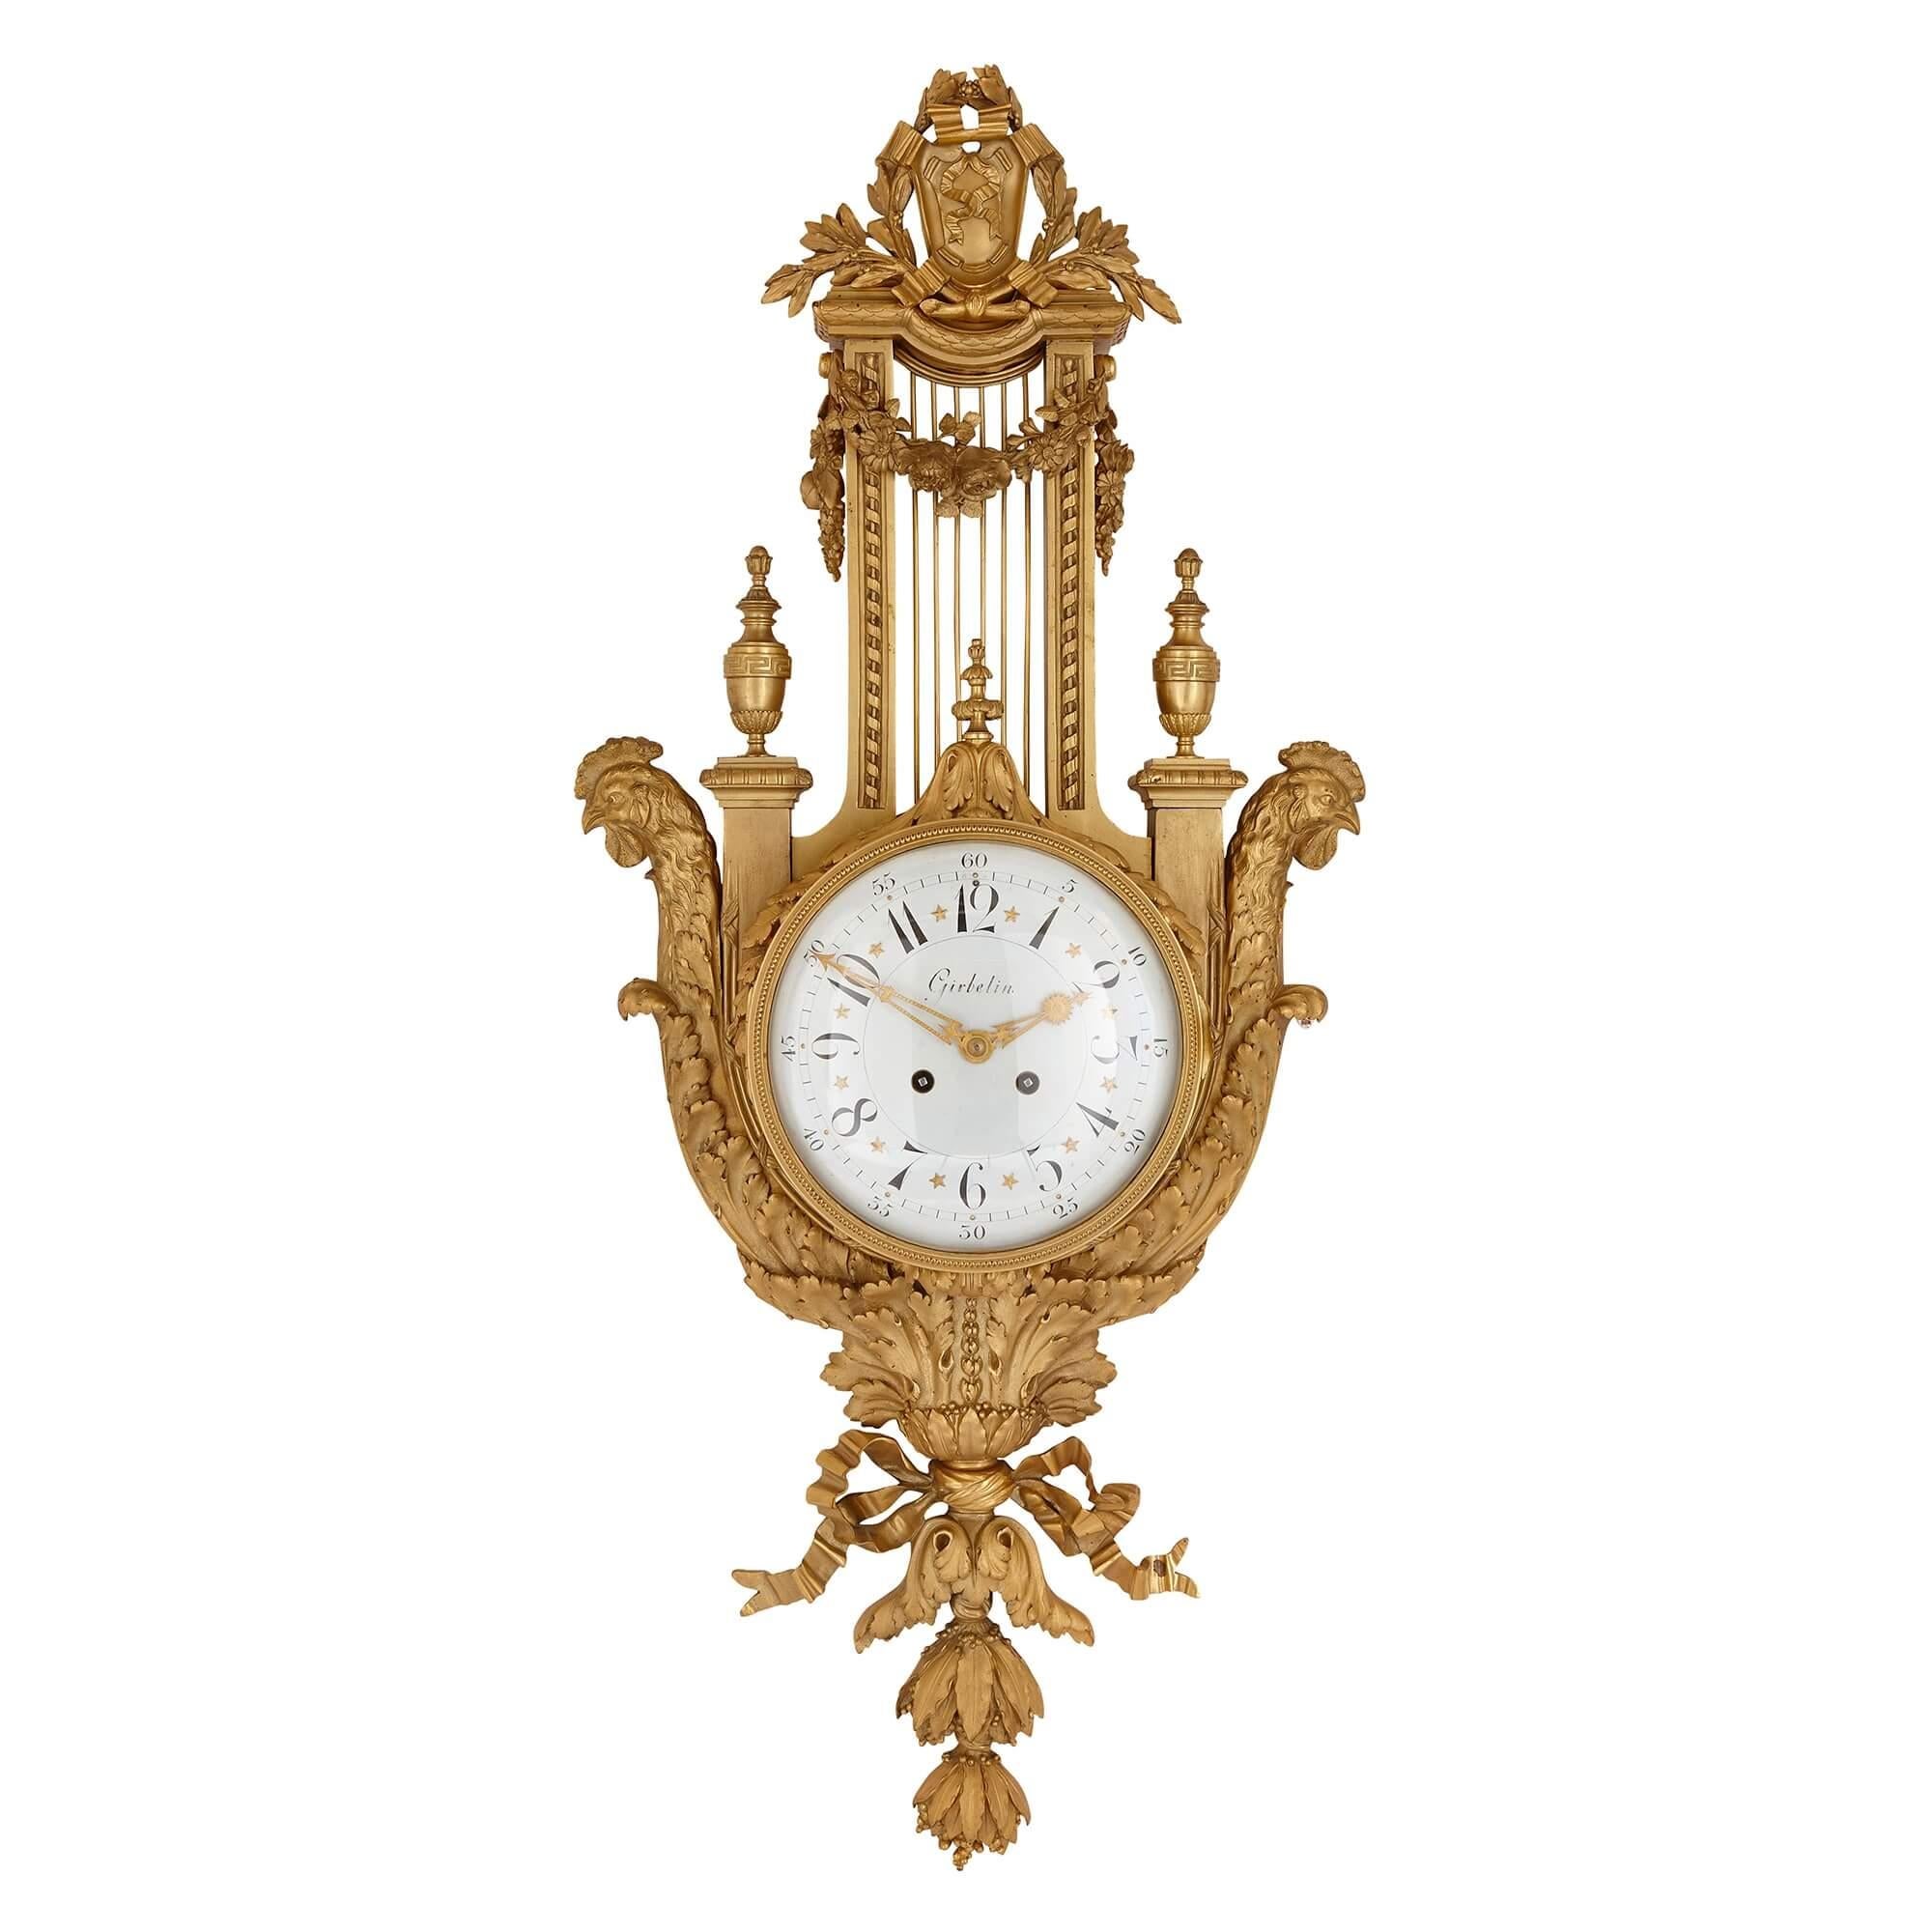 This fine set comprises a cartel clock and barometer, each of which are crafted entirely in gilt bronze. The clock and barometer cases are identical, and take the form of a lyre. The circular dials are set to the centre, within the body of the